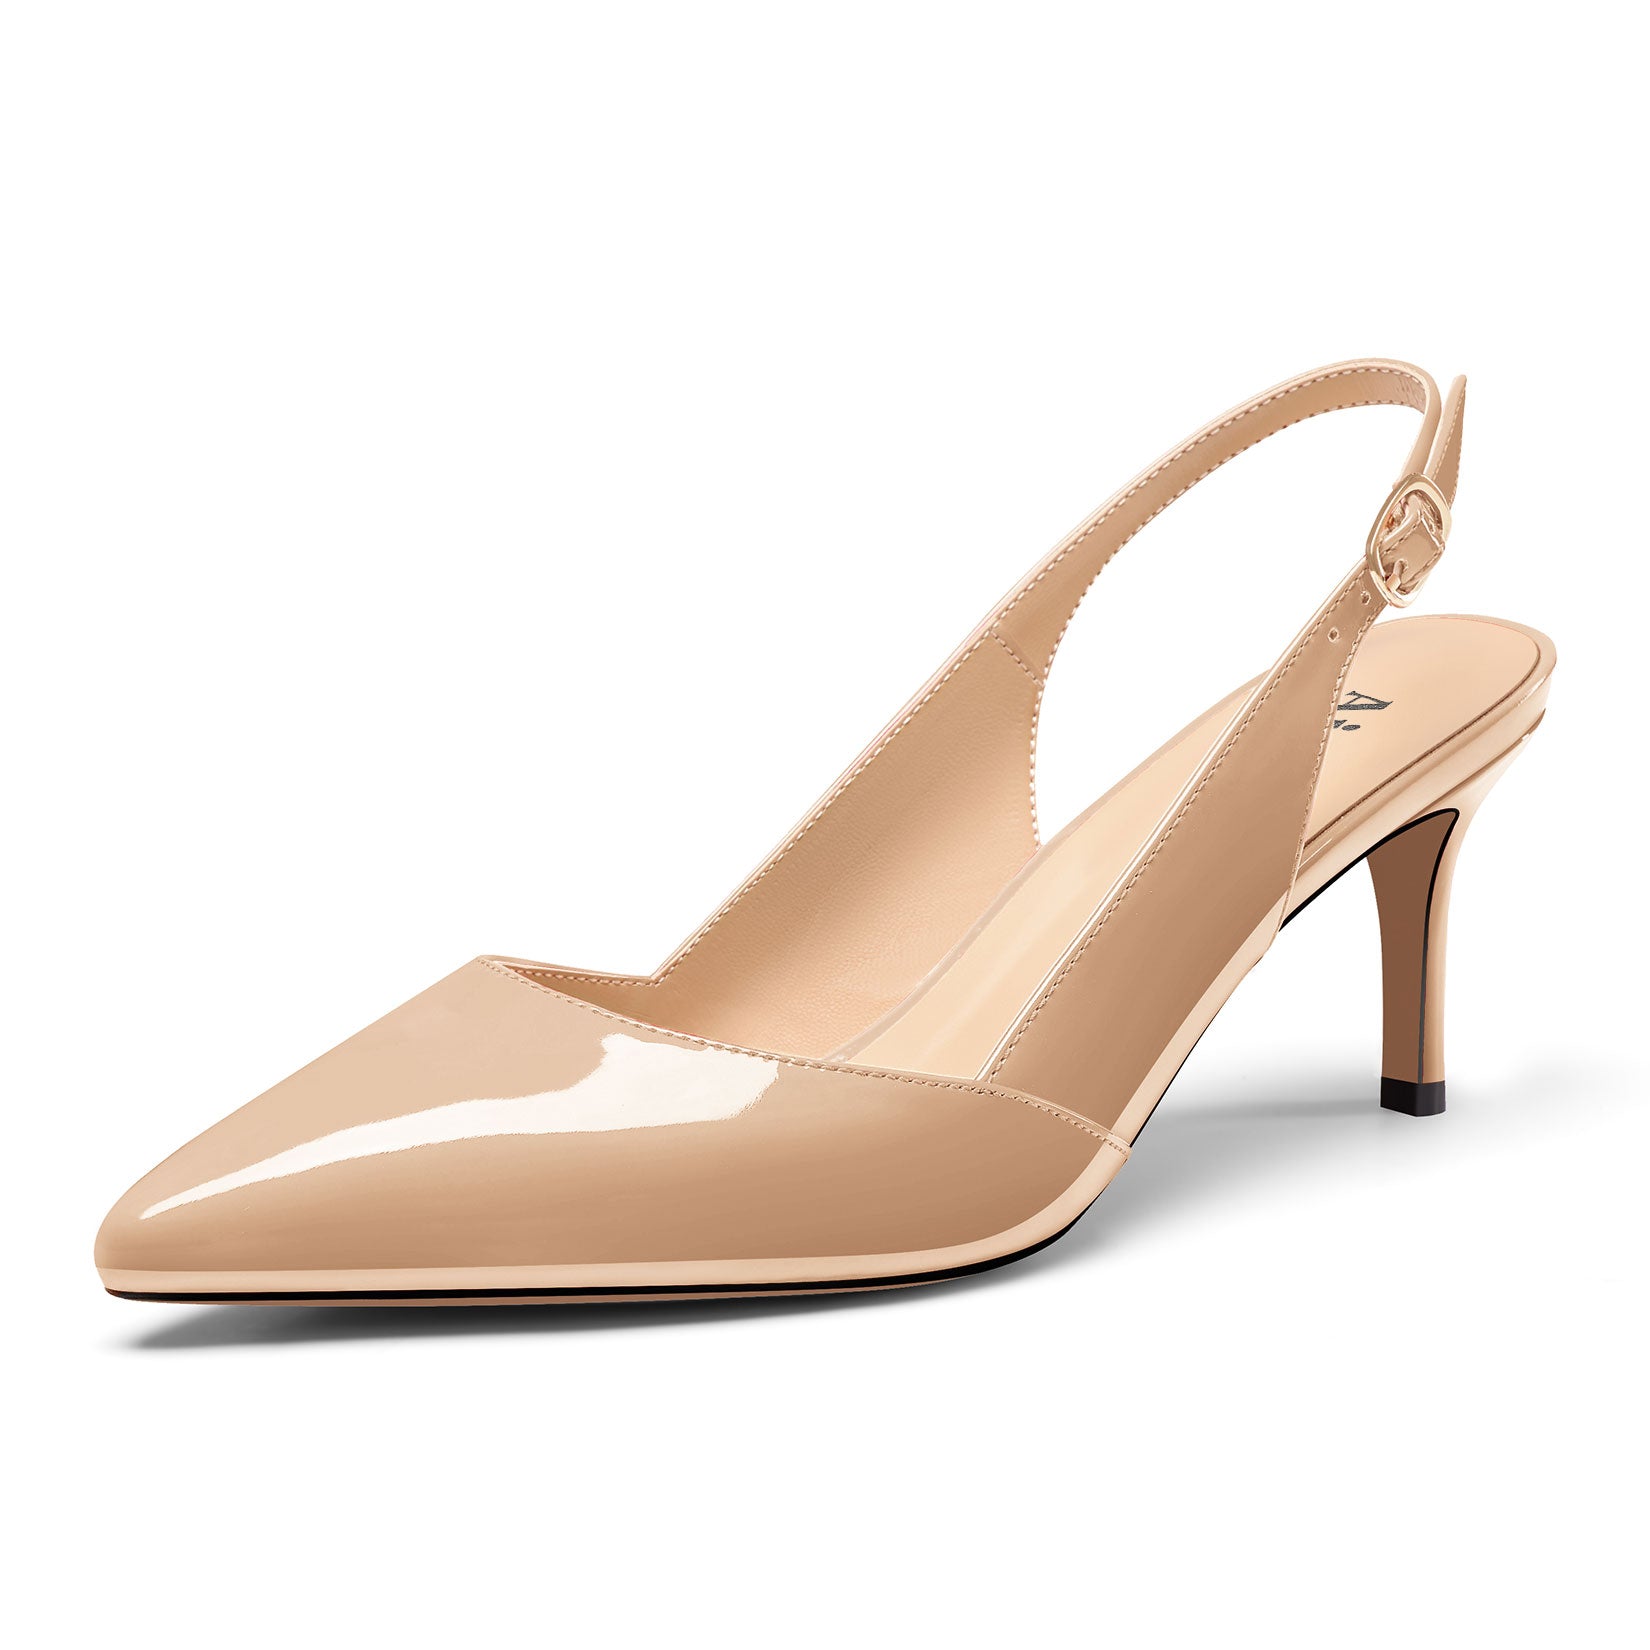 Ladies' Pointed Toe Slingback Pumps 2.3-Inch Heel, Alluringly Sleek with Patent Leather Finish, Fashionably Versatile Shoes